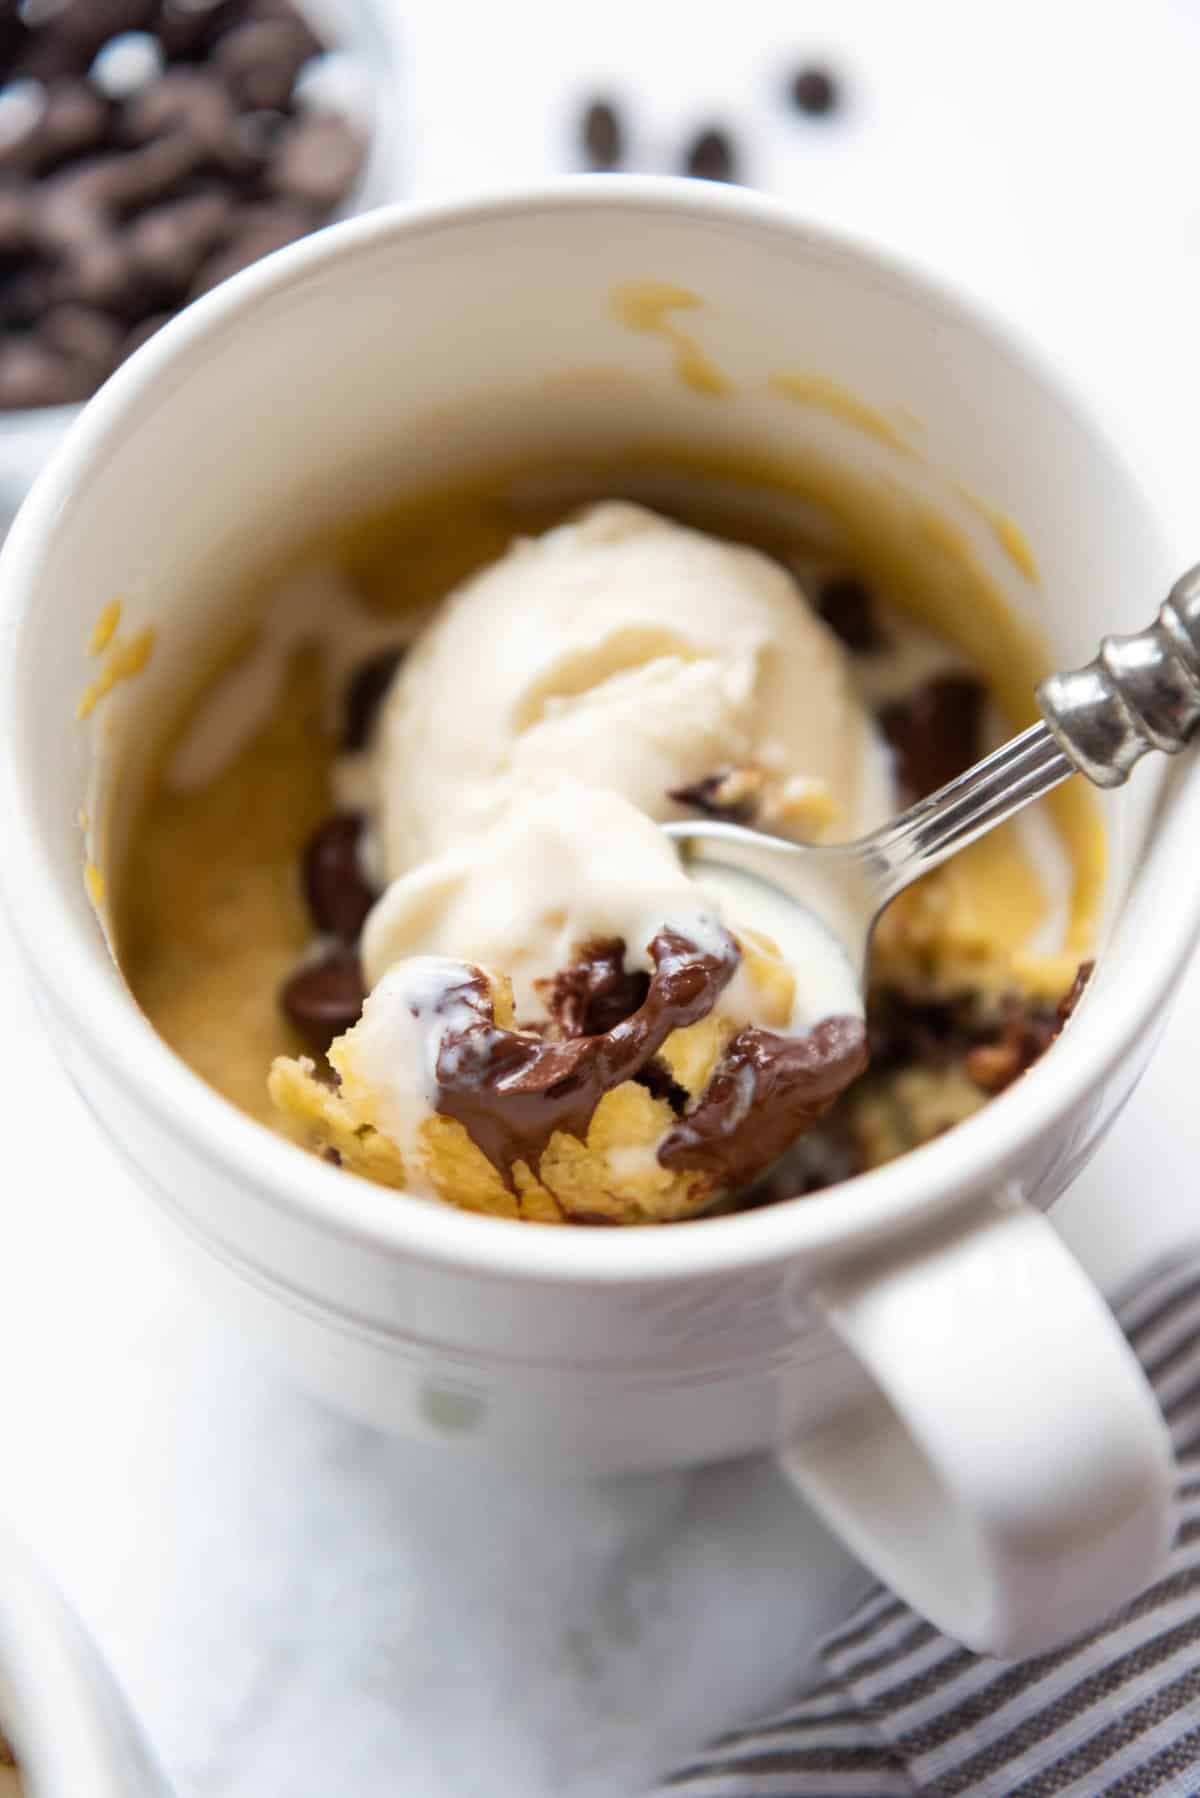 A spoon lifting a bite of chocolate chip cookie in a mug with vanilla ice cream.